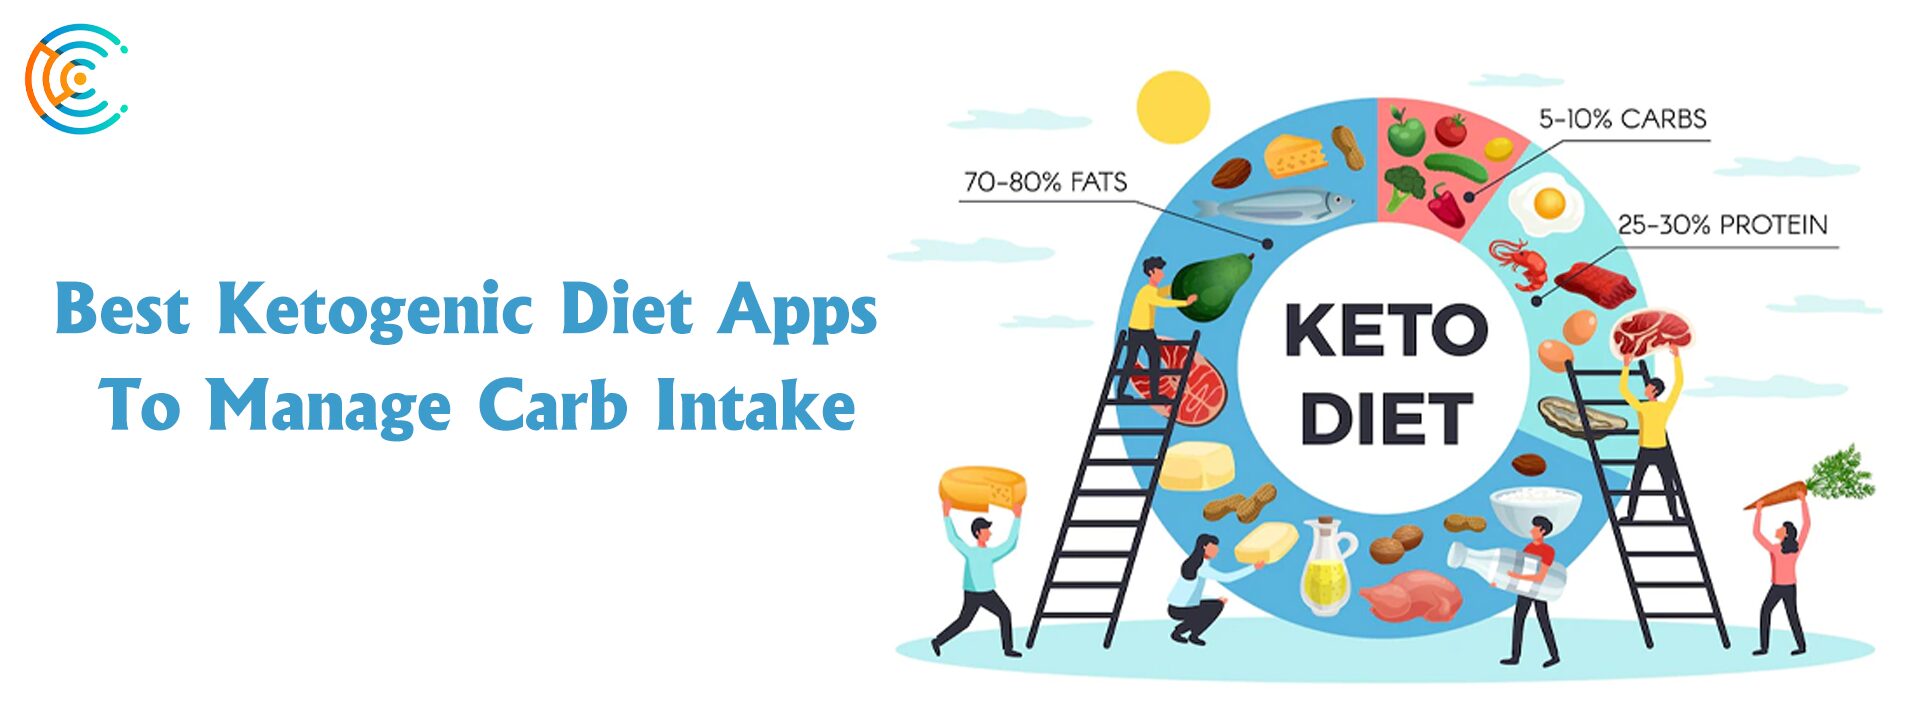 Best Ketogenic Diet Apps To Manage Carb Intake